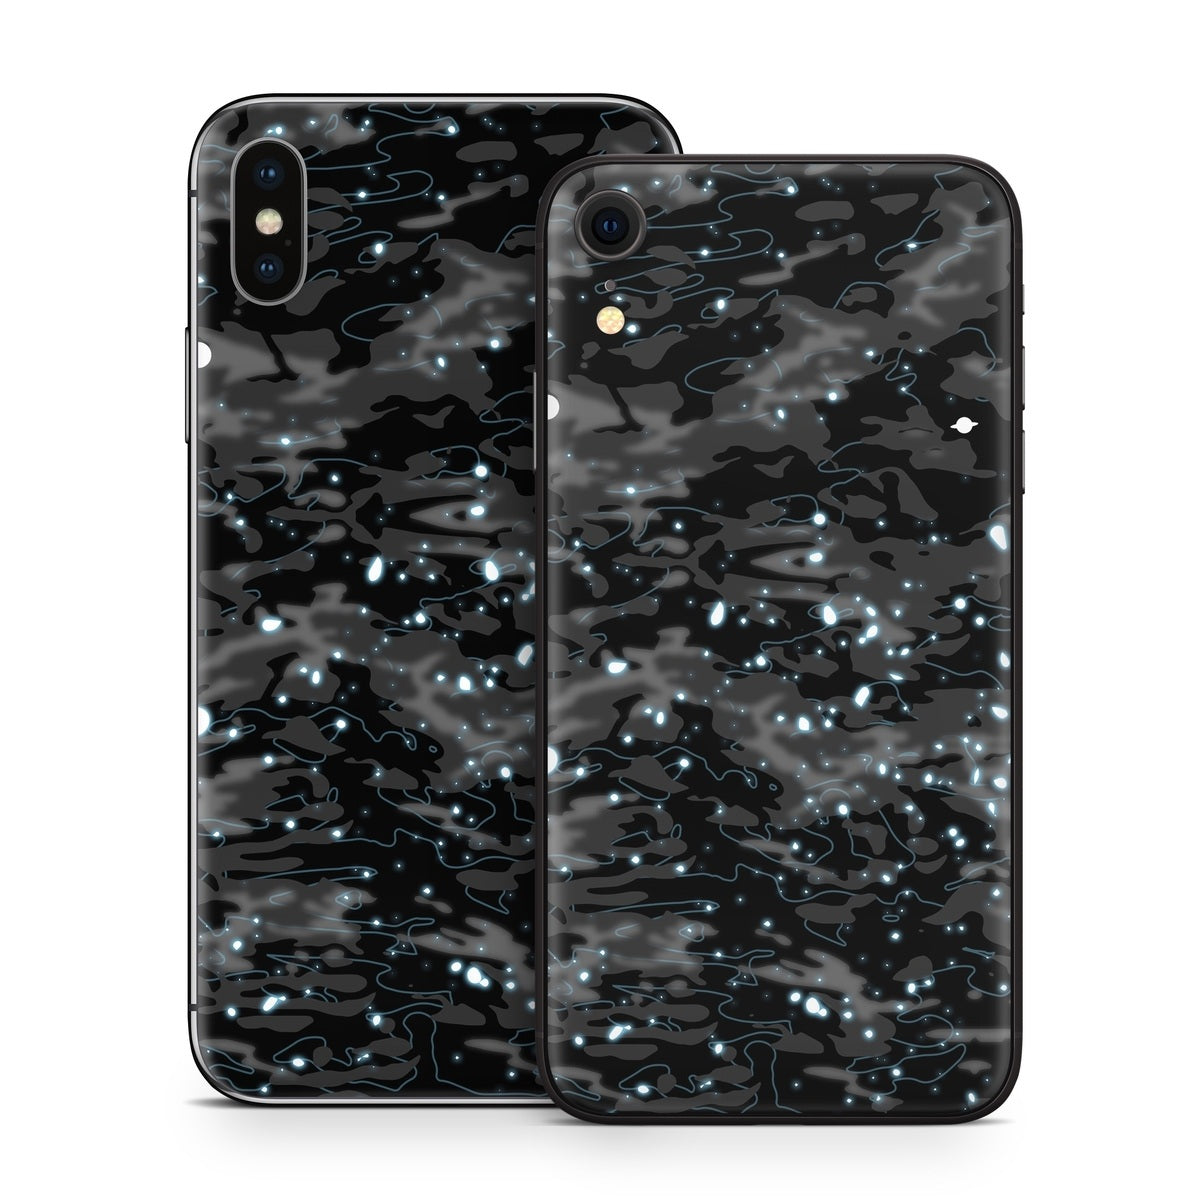 Gimme Space - Apple iPhone X Skin